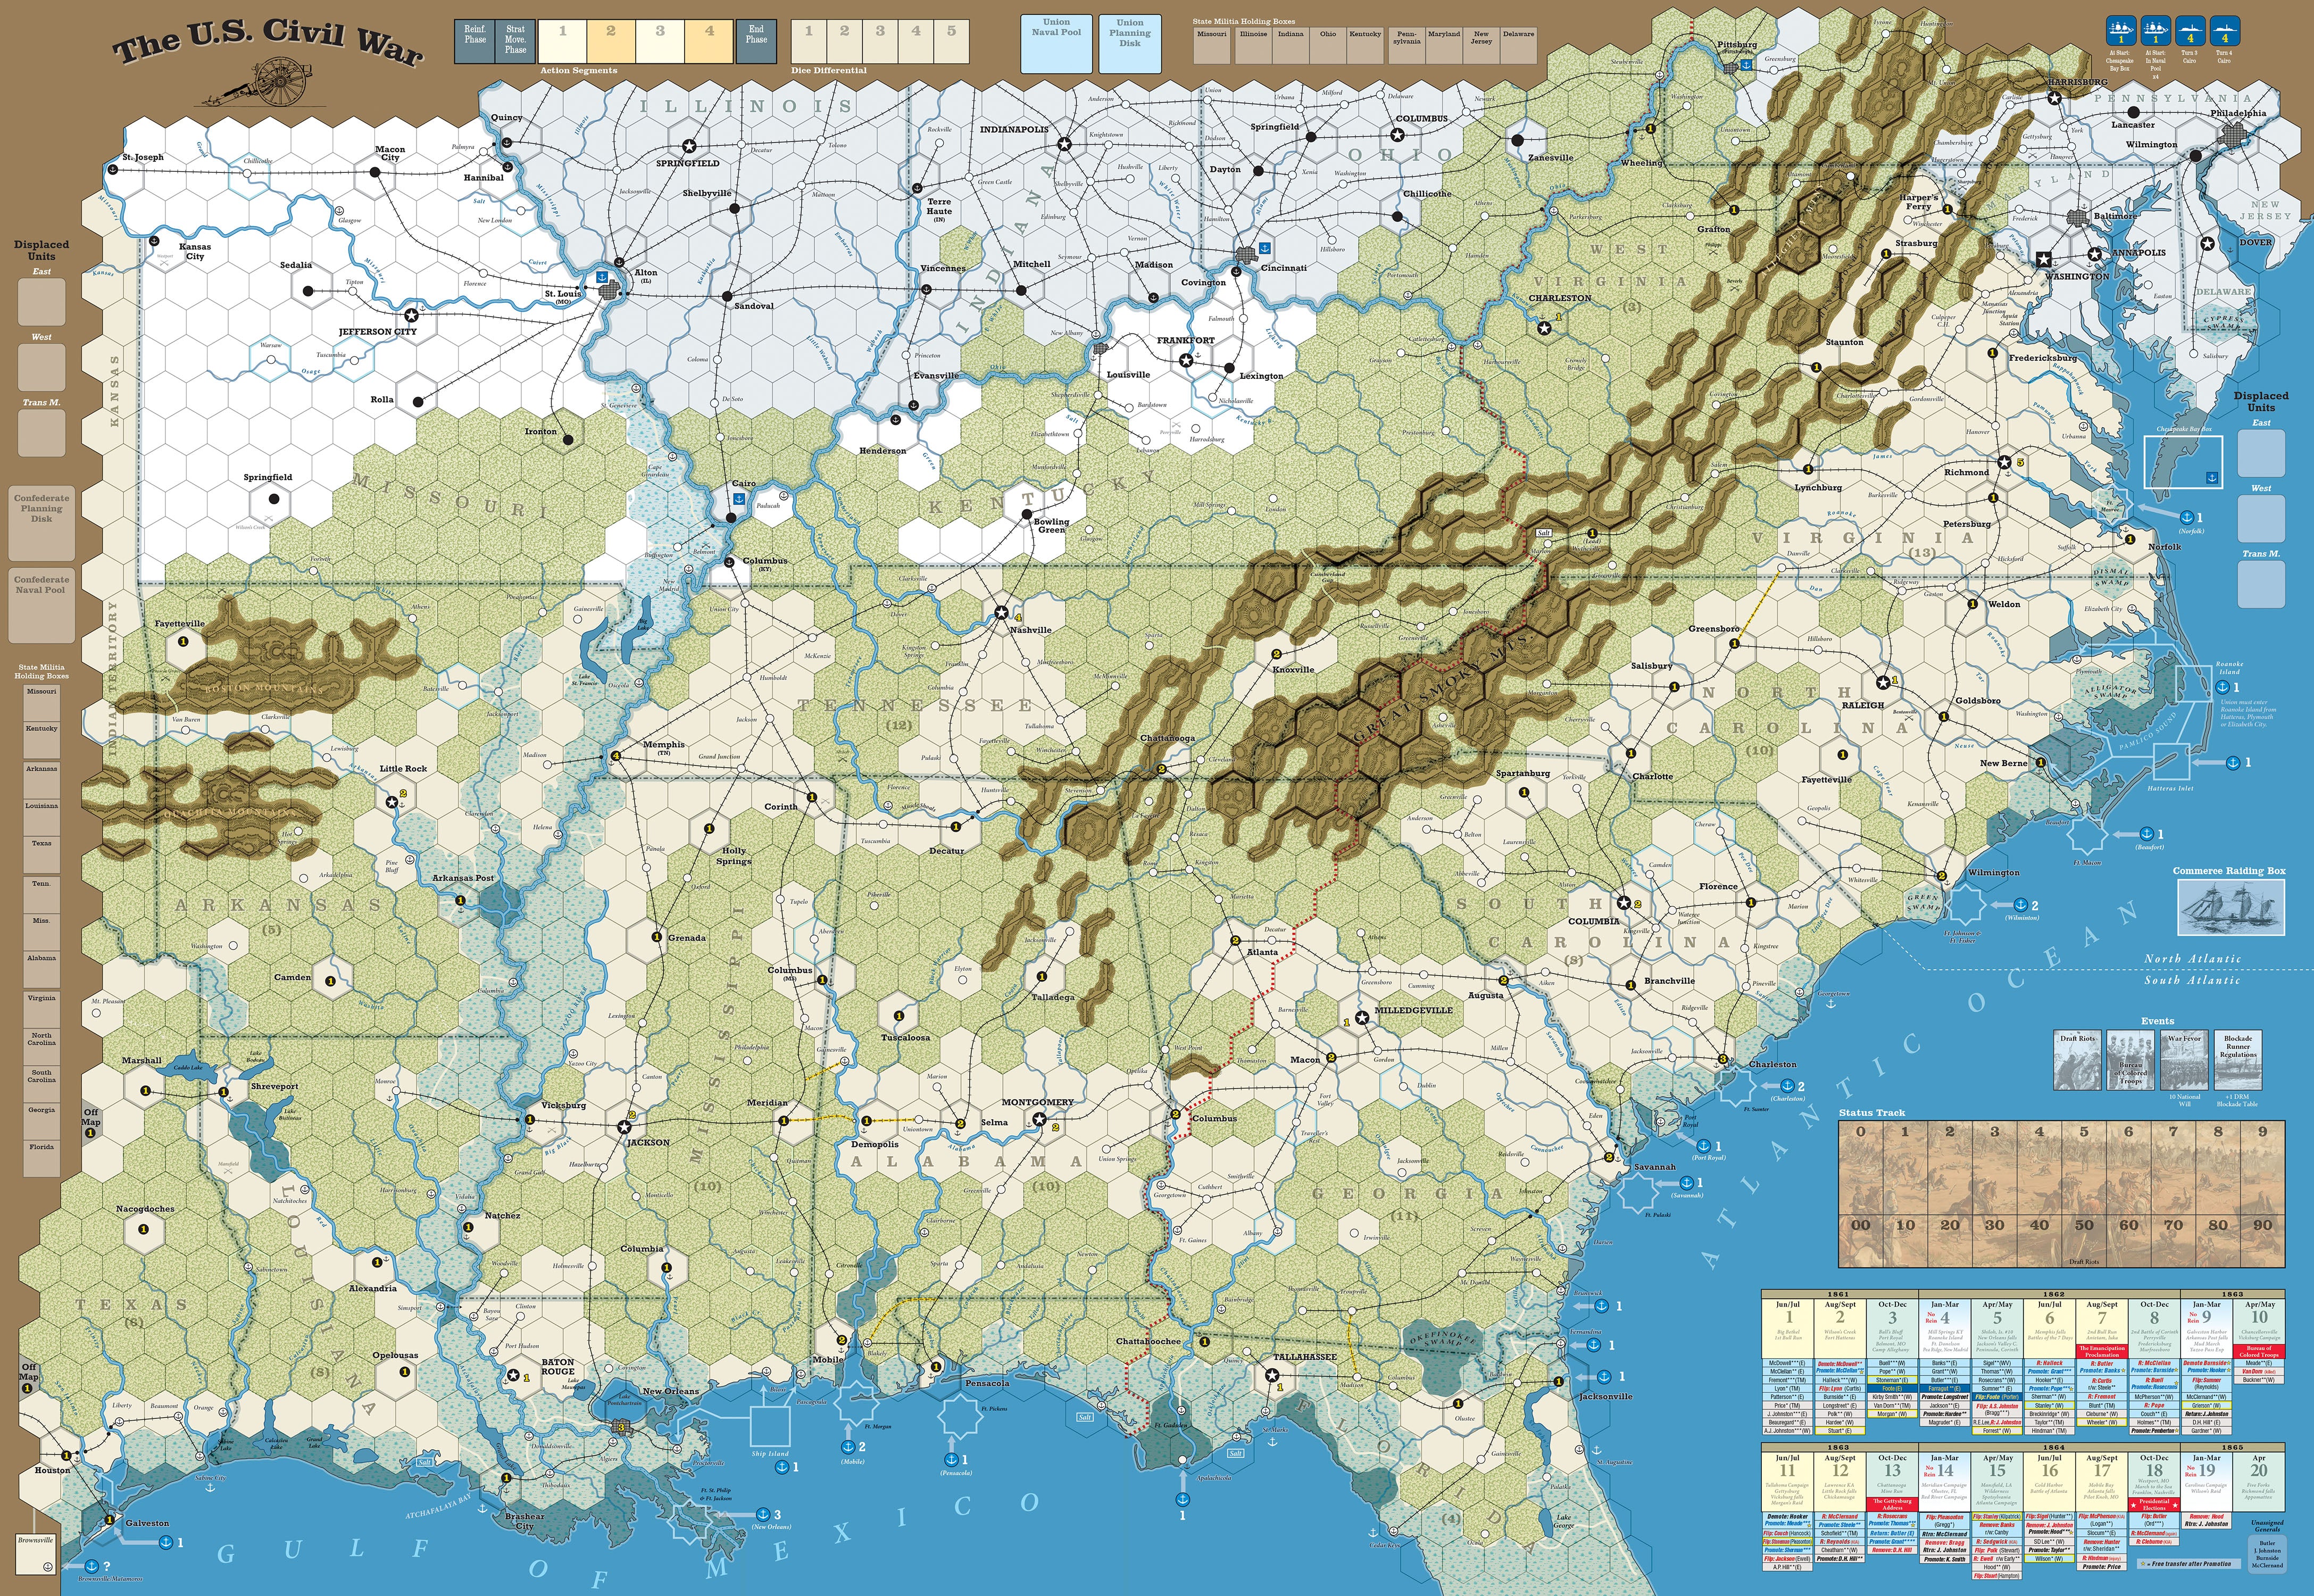 US Civil War (2nd printing) Game Map showing the southern portion of the United States during Civil war times.